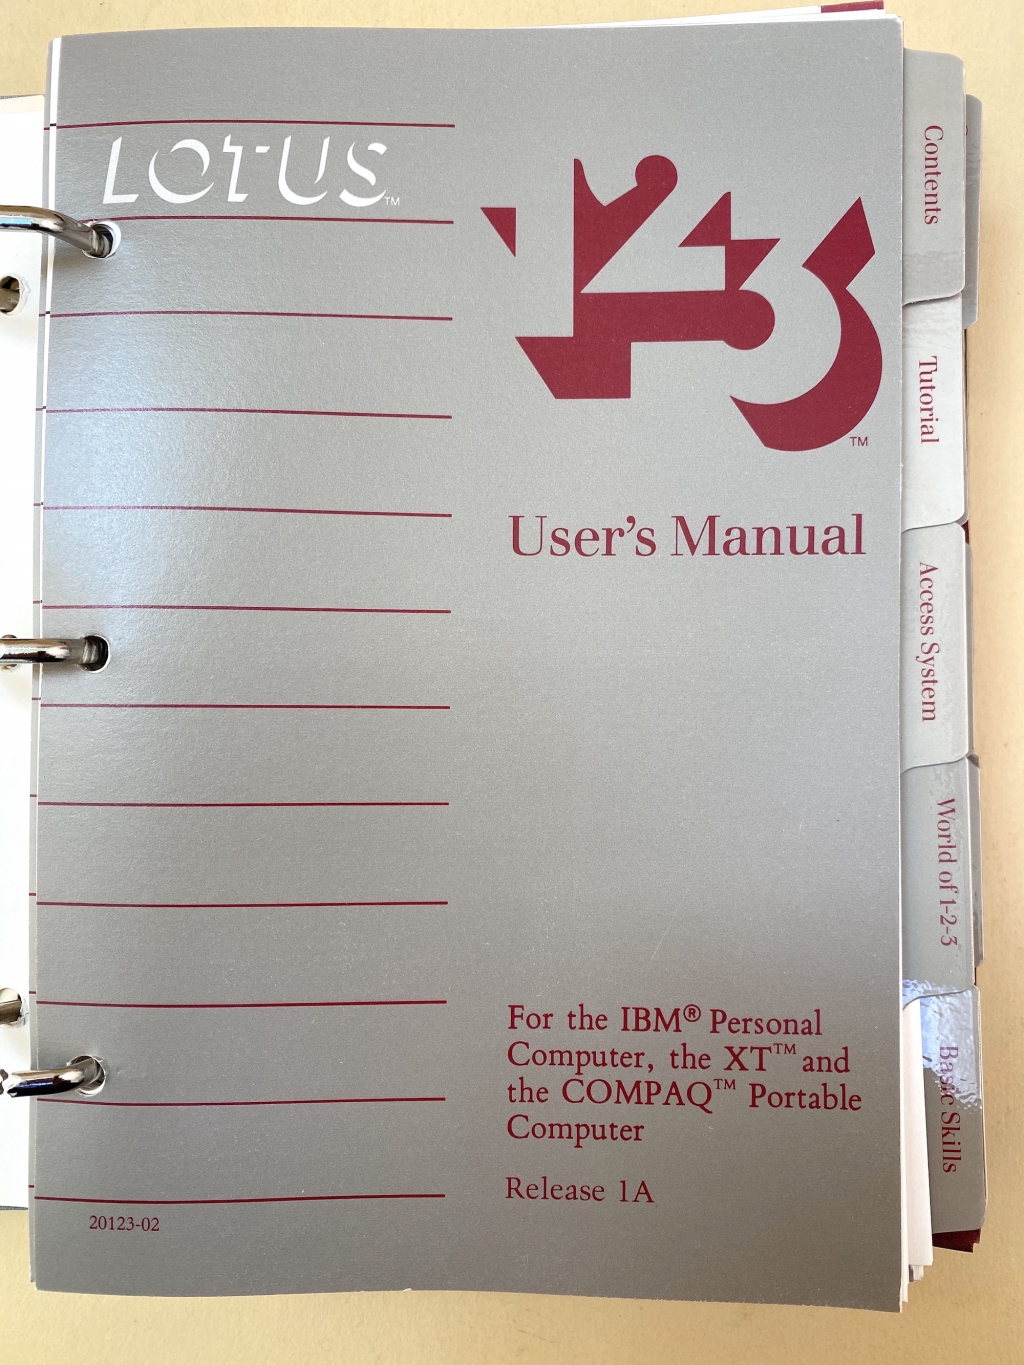 First page of User's Manual for release 1A of Lotus 123.